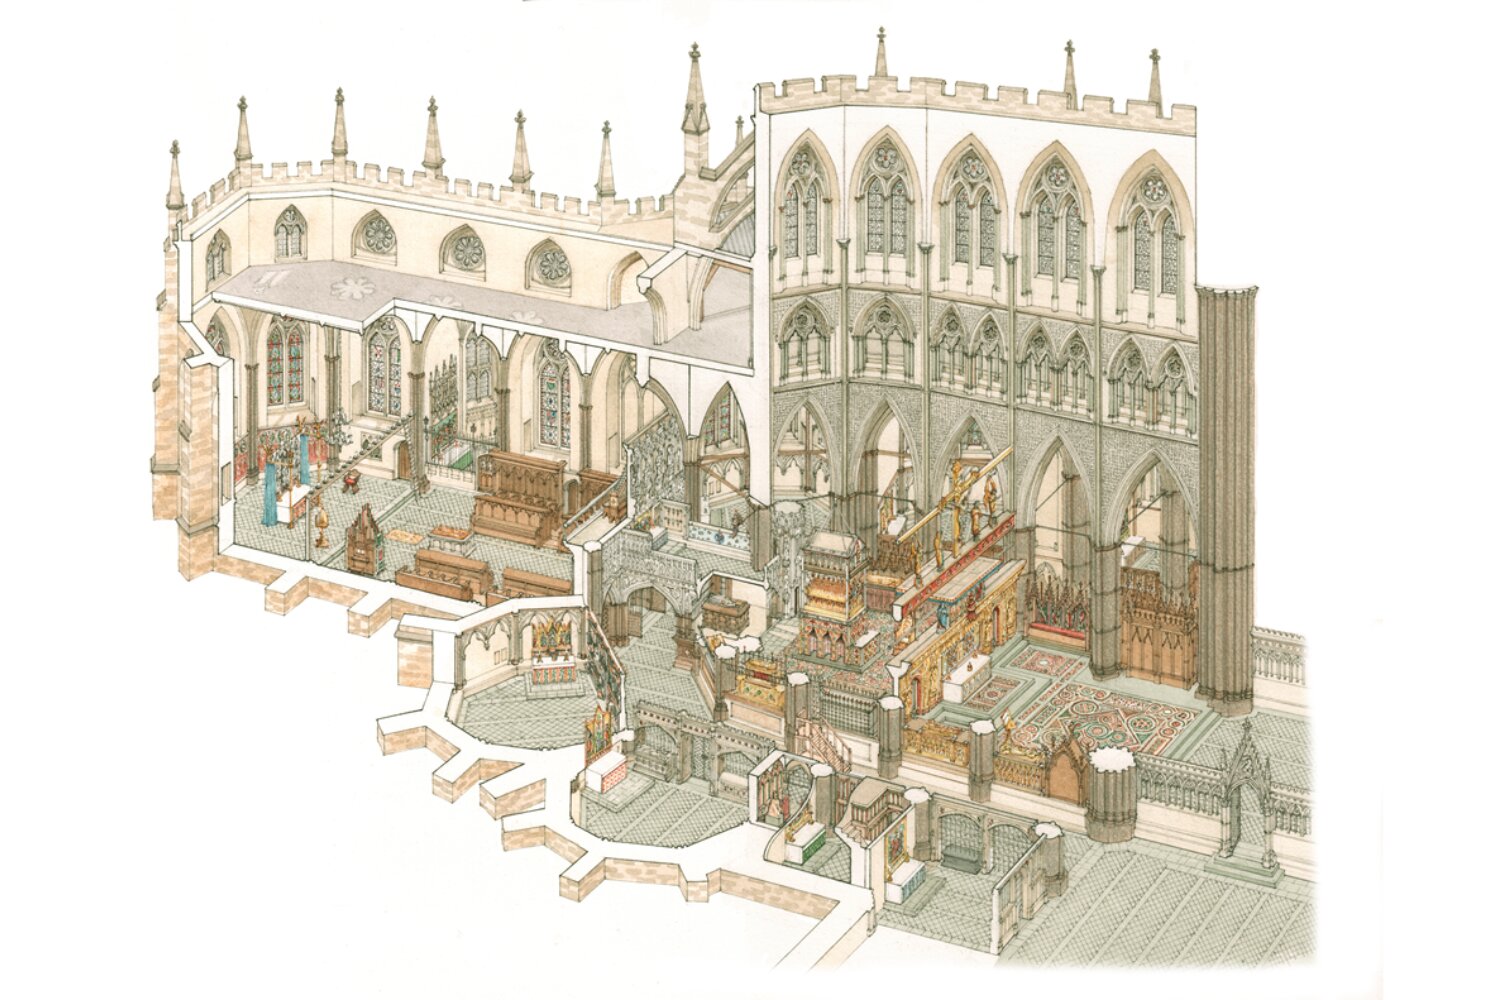 #Lost medieval chapel sheds light on royal burials at Westminster Abbey, finds new study on 15th-century reconstruction